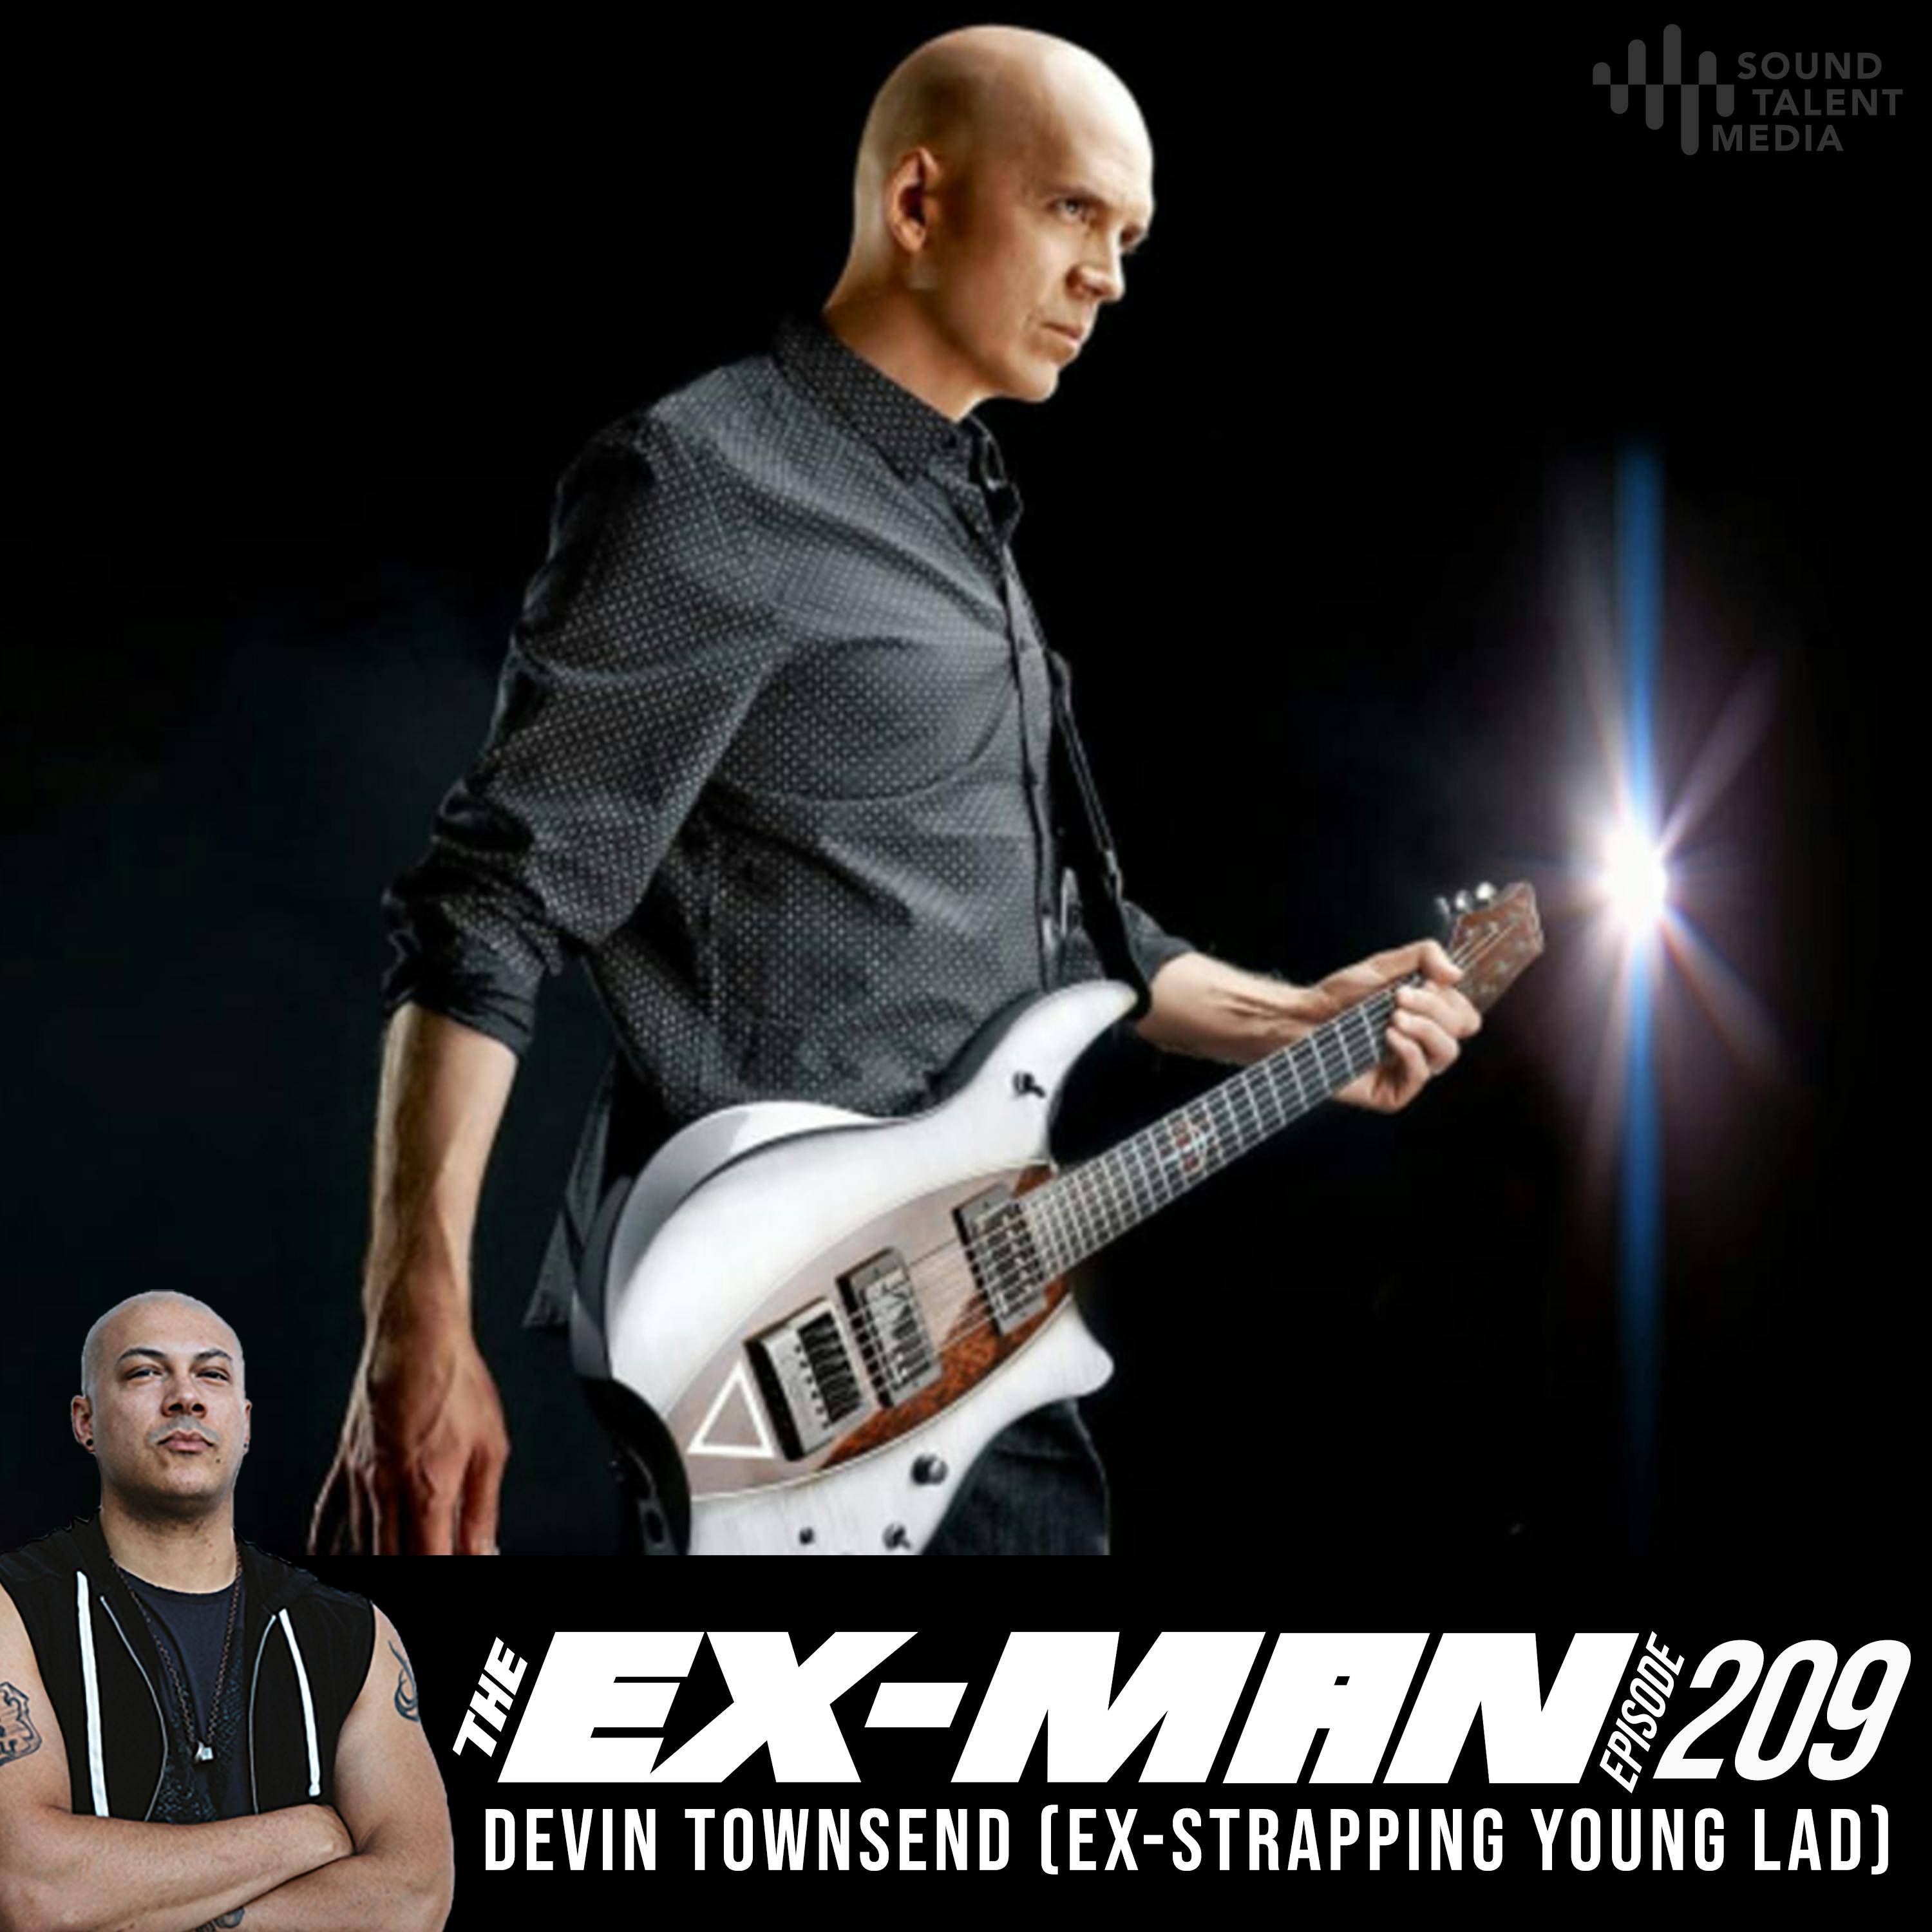 Devin Townsend (ex-Strapping Young Lad)